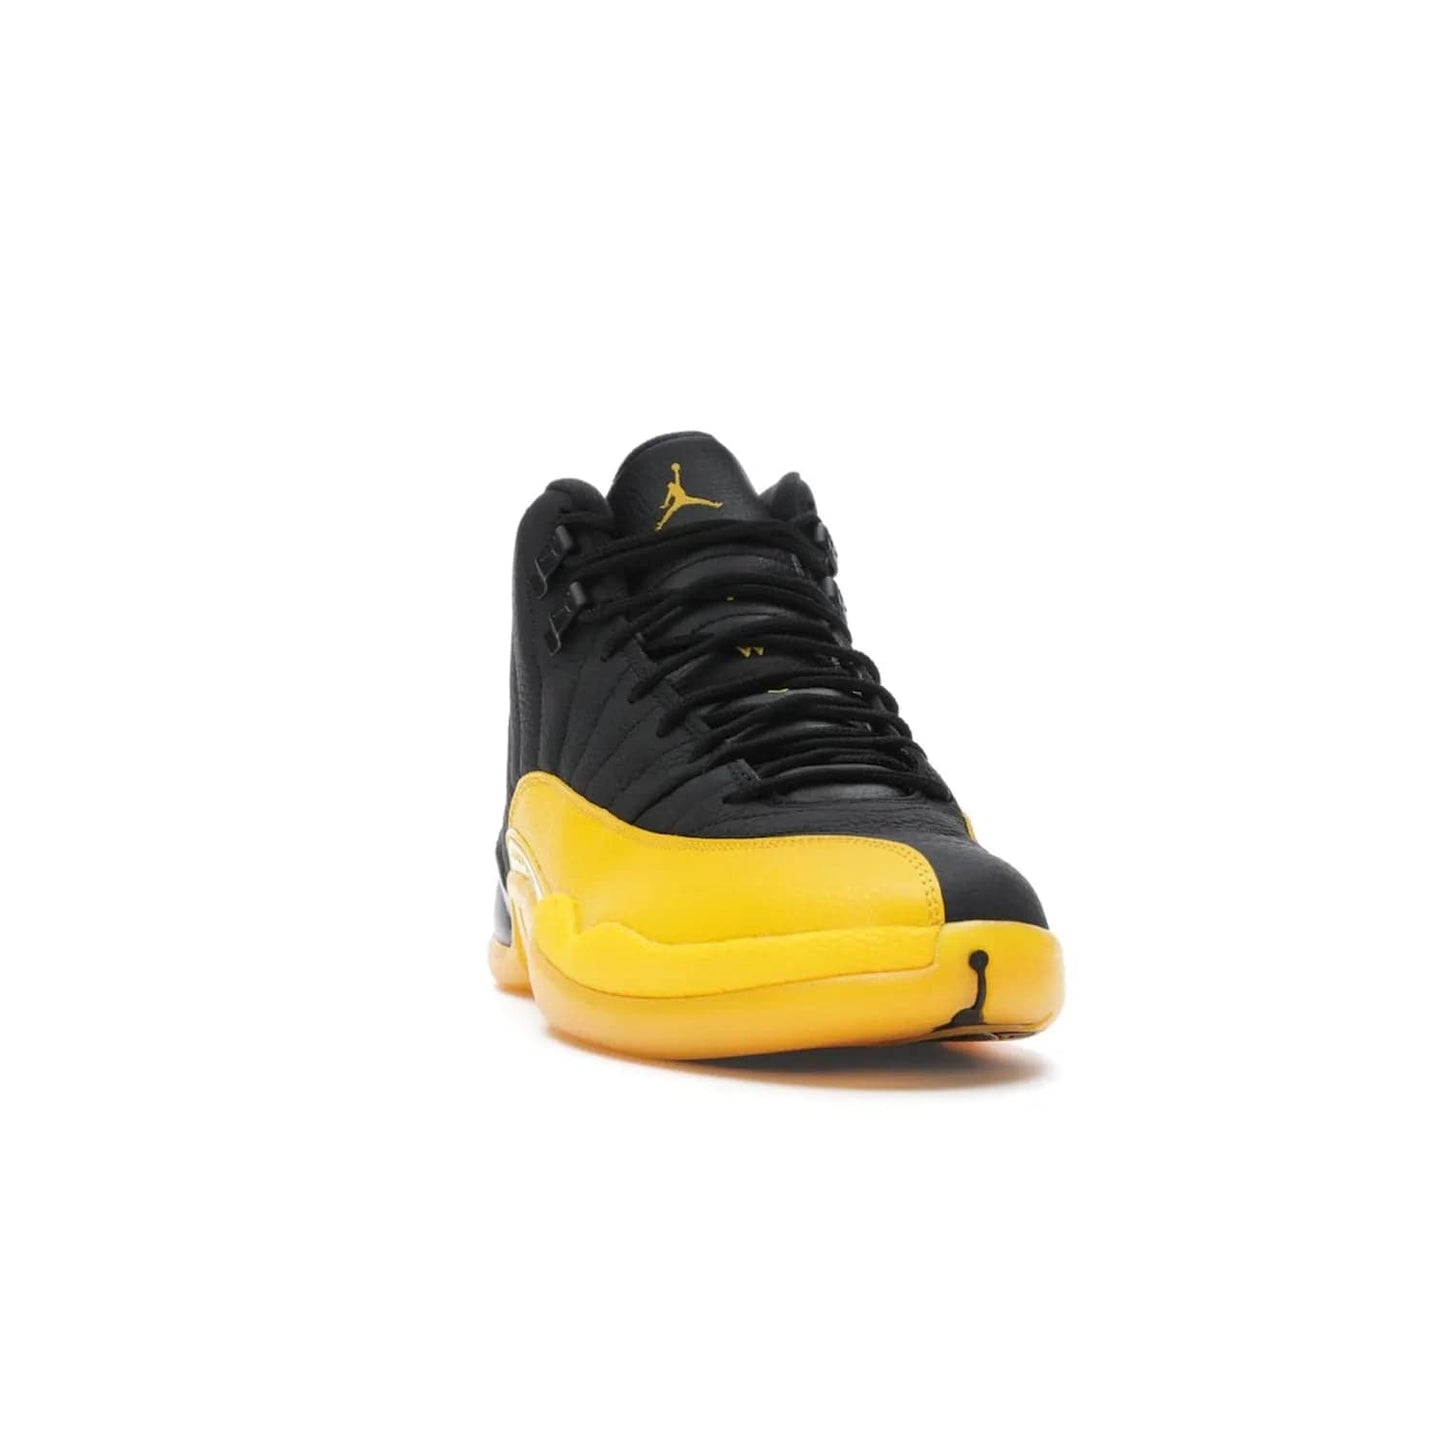 Jordan 12 Retro Black University Gold - Image 8 - Only at www.BallersClubKickz.com - This Jordan 12 Retro features a black tumbled leather upper and University Gold accents for a modern twist. Boasting Jordan "Two Three" branding and a yellow sole, these shoes will elevate your wardrobe. Fresh, sleek, and one of a kind - the Jordan 12 University Gold is your summer sneaker.